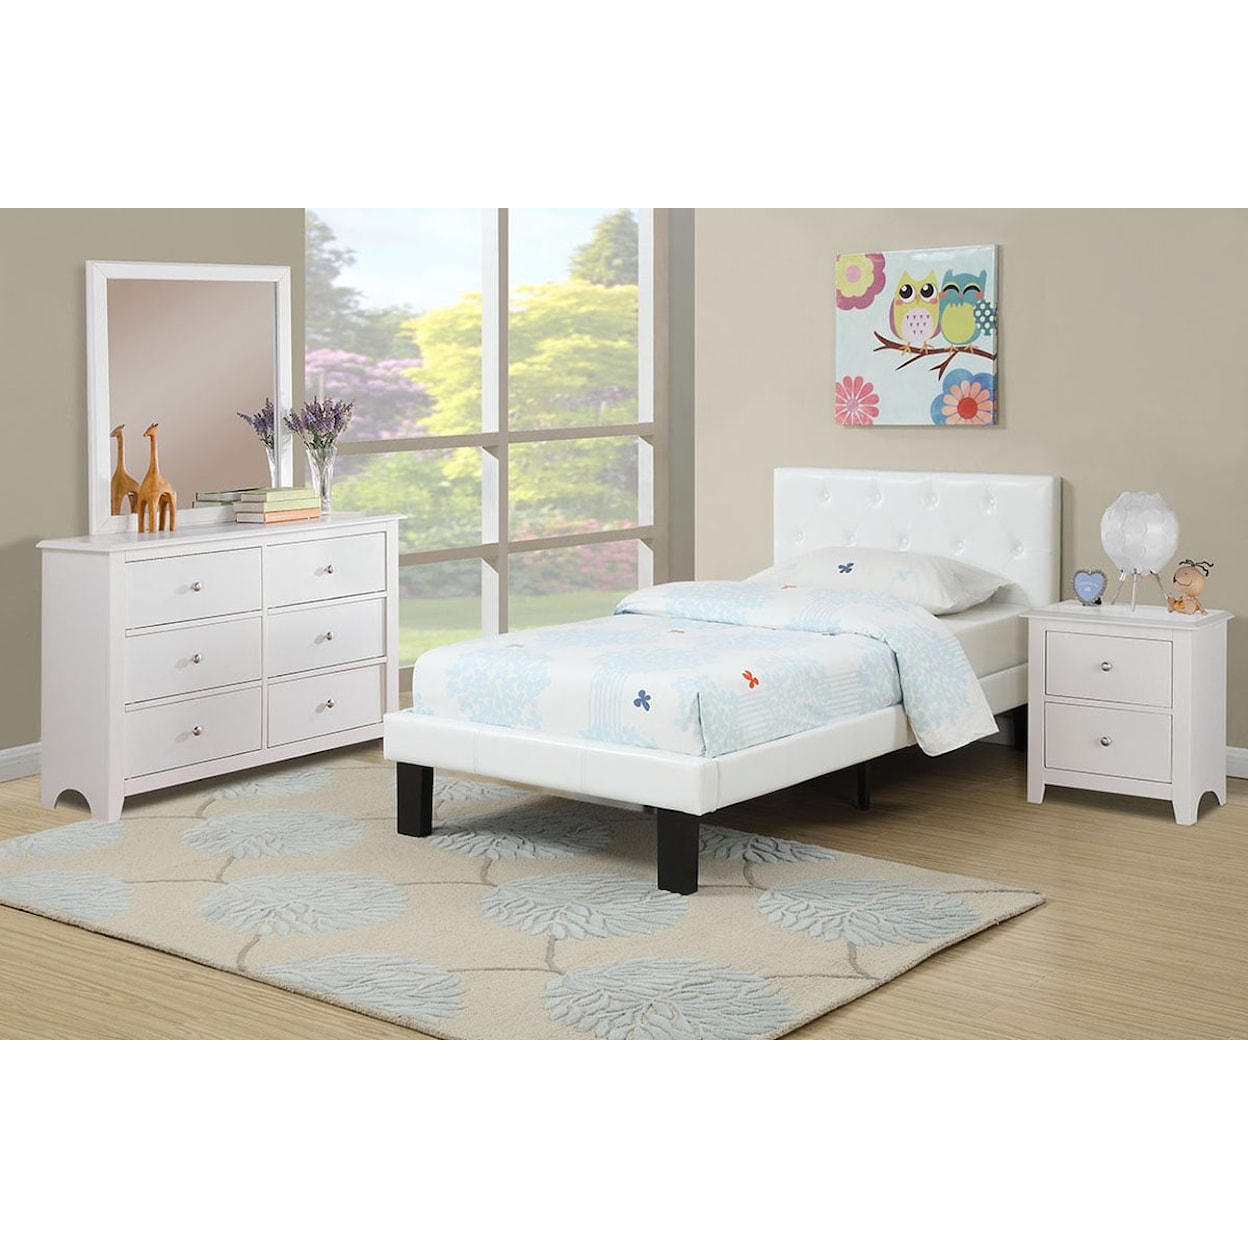 Poundex Twin/Full Beds WHITE TWIN BED W/ SLATS |